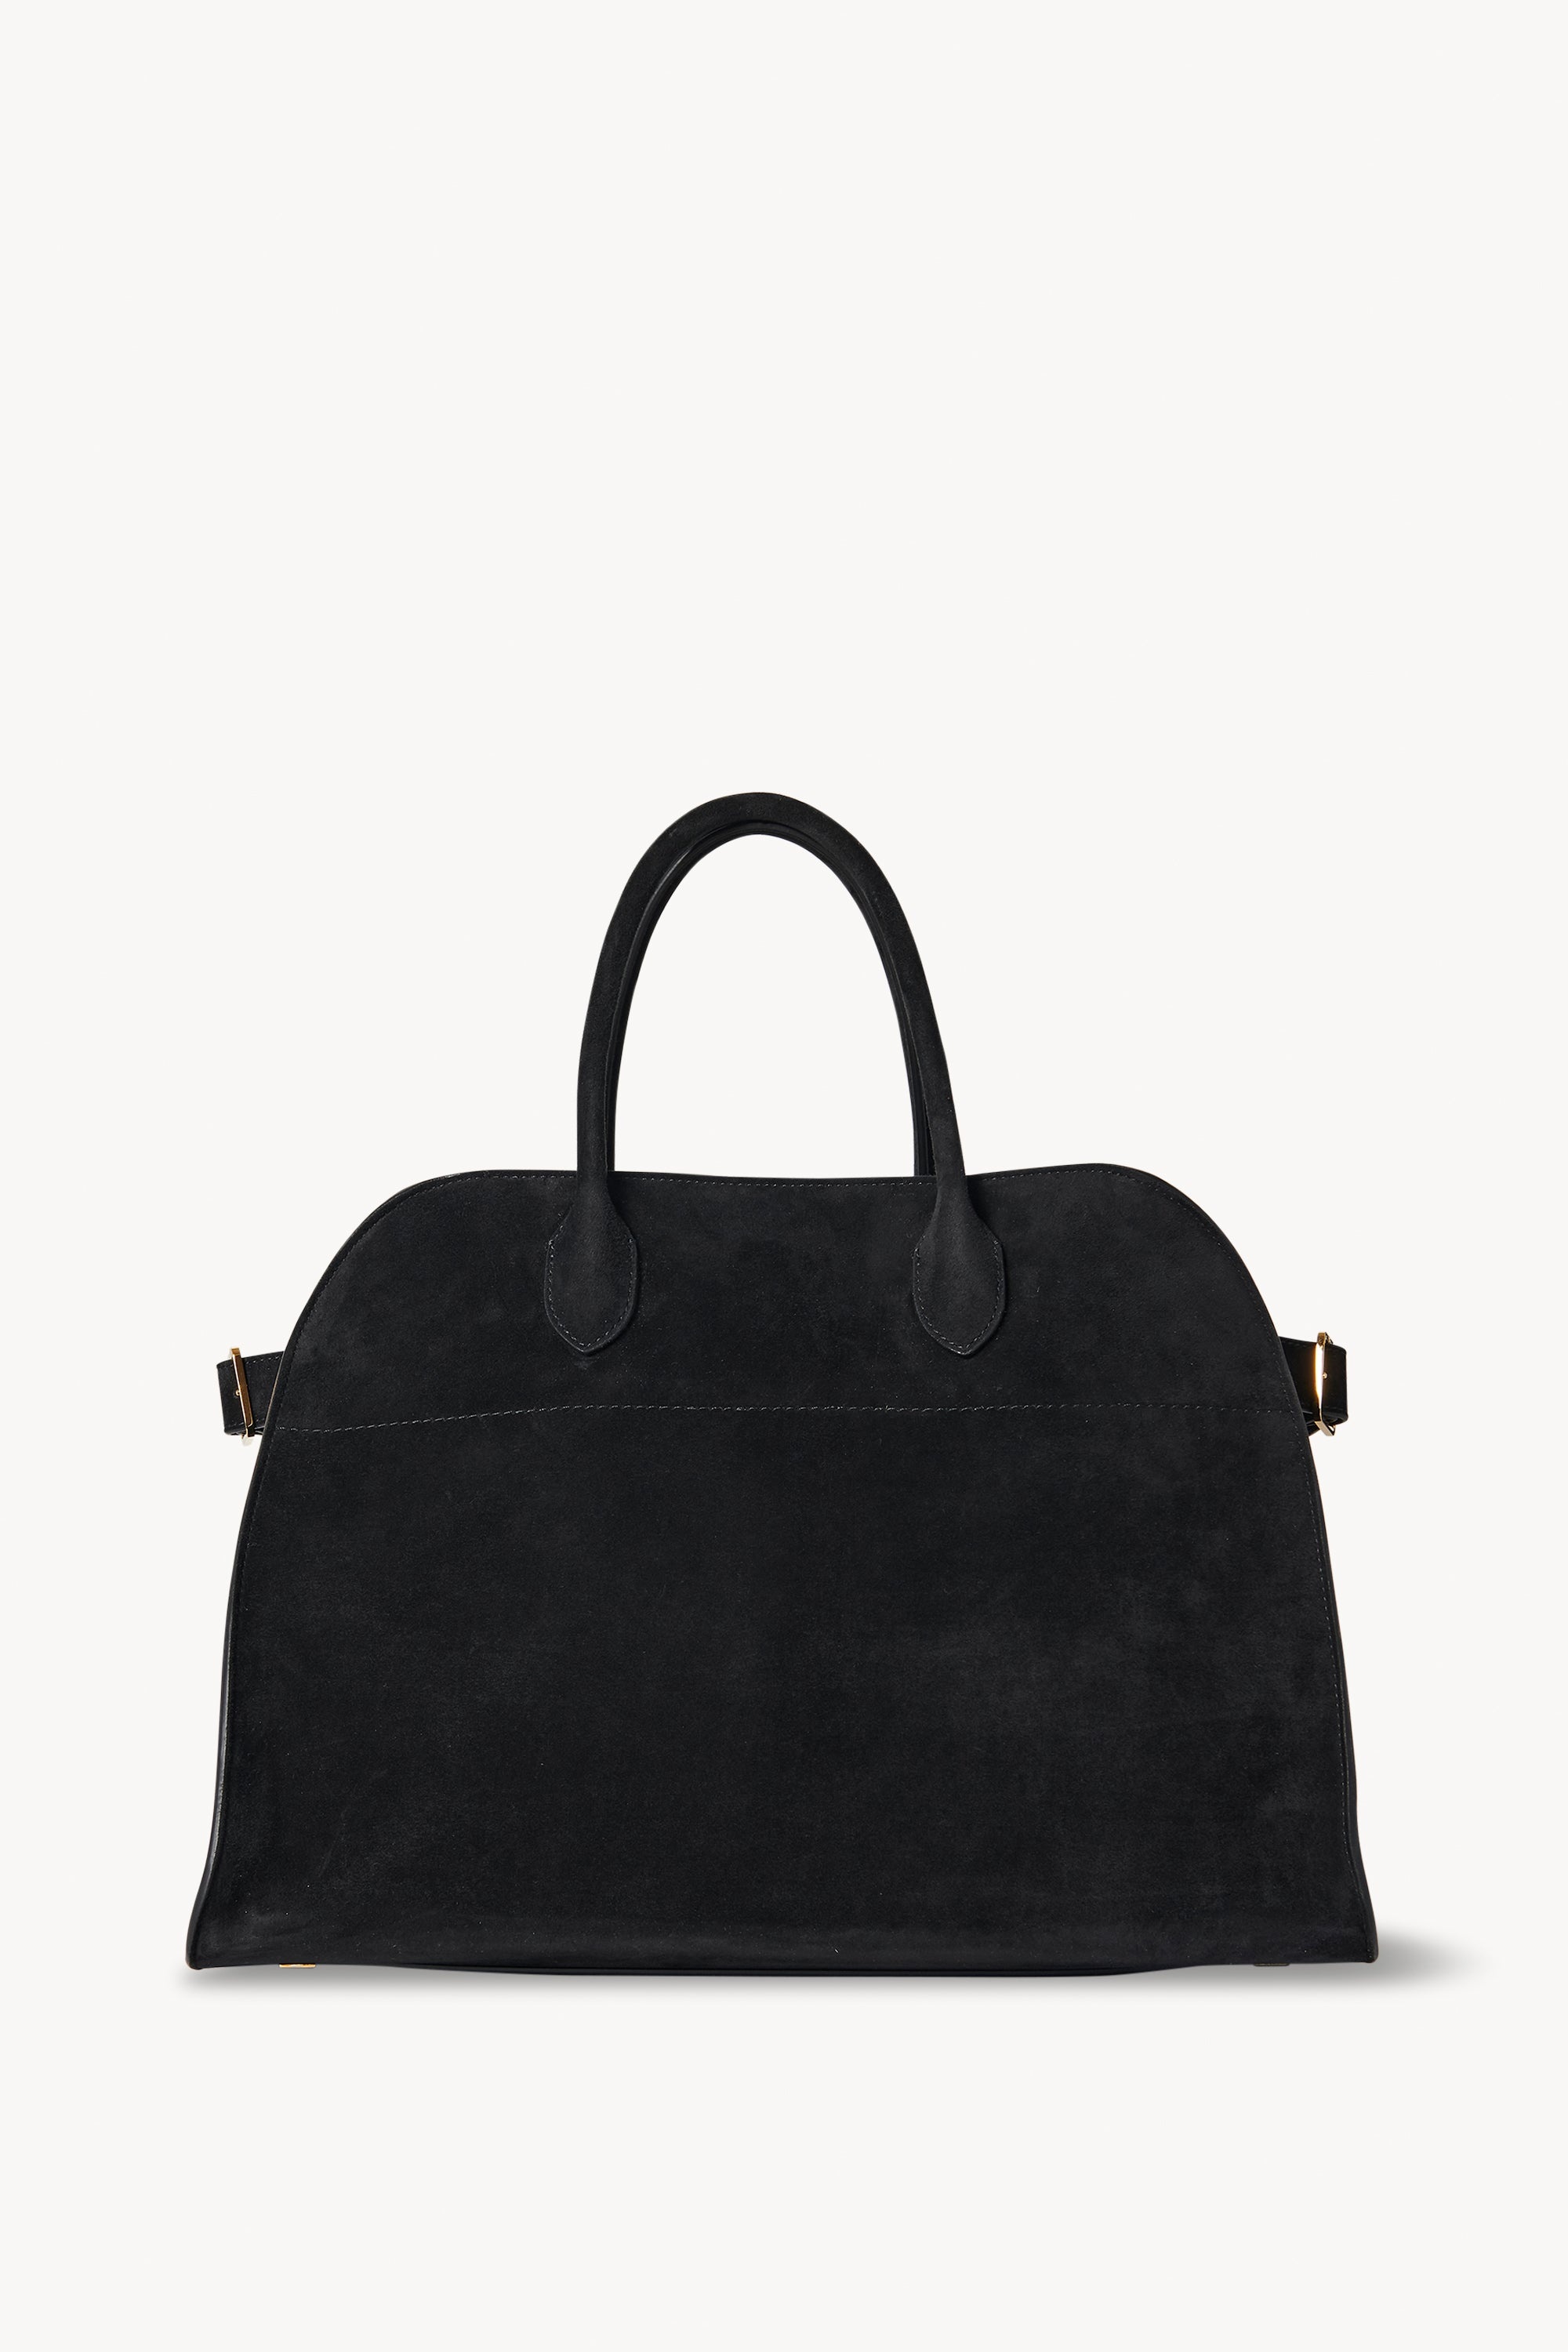 The Row, Soft Margaux 15 black leather bag